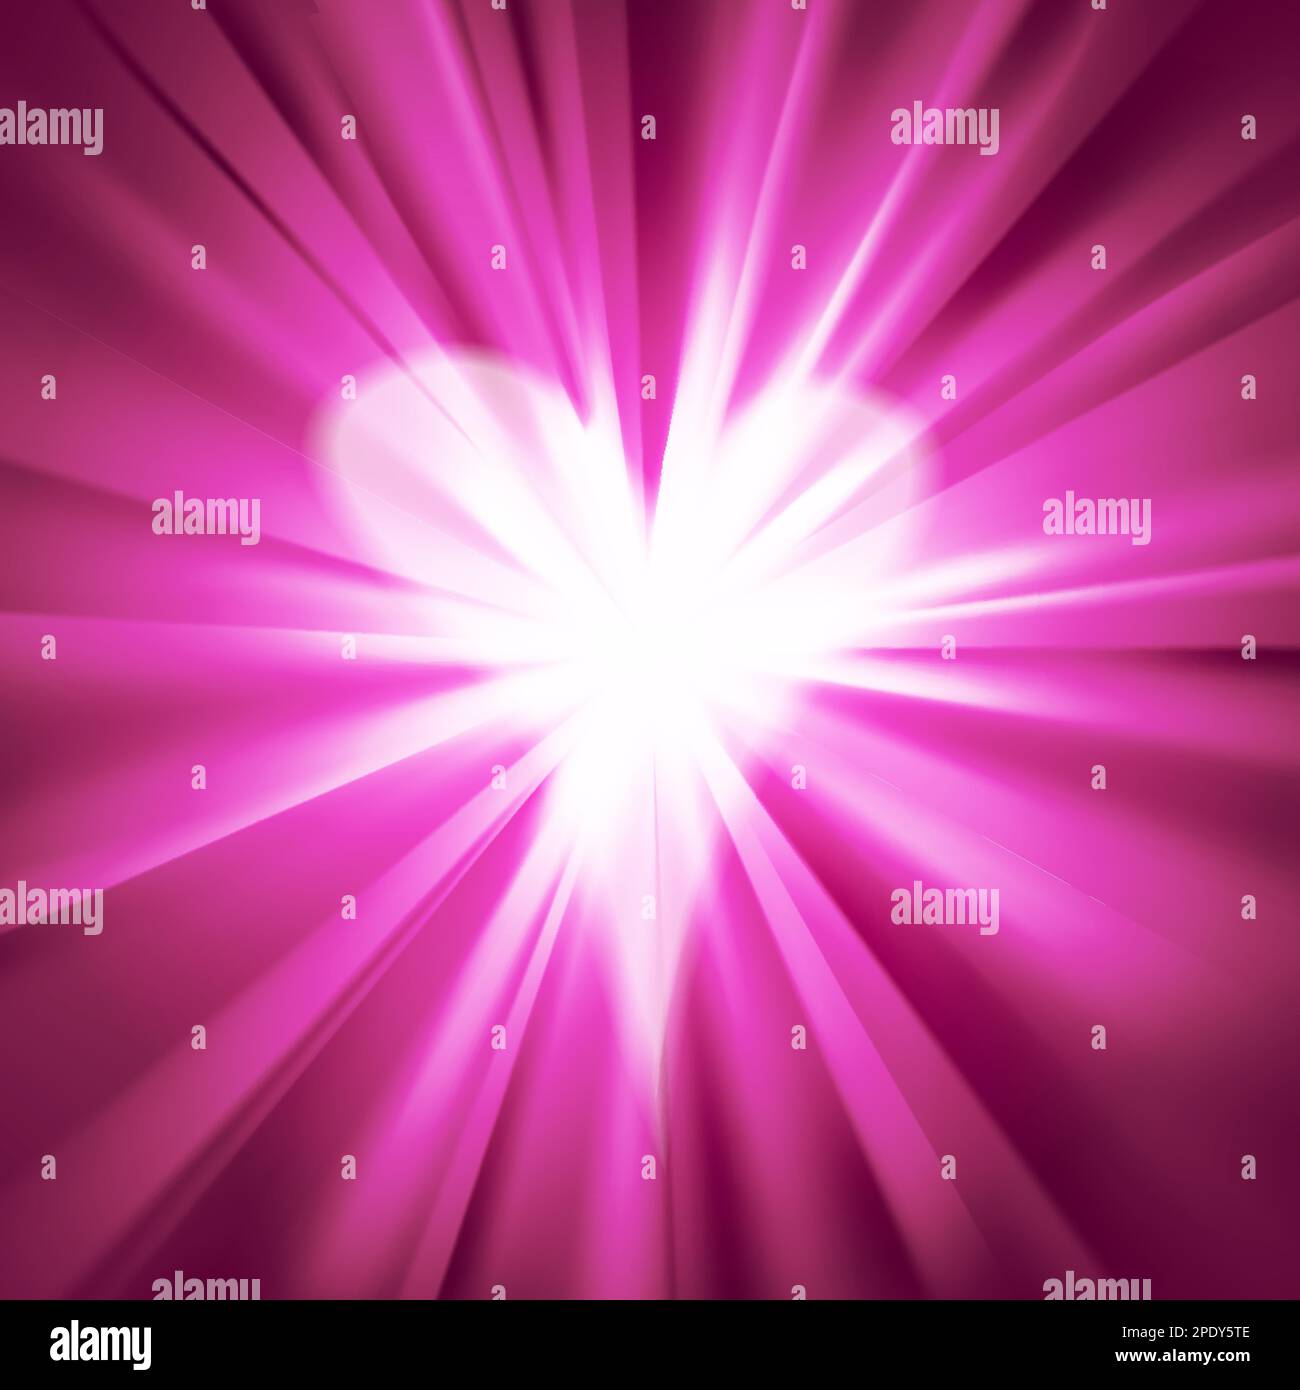 Pink flare with a heart. Abstract romantic background with glowing